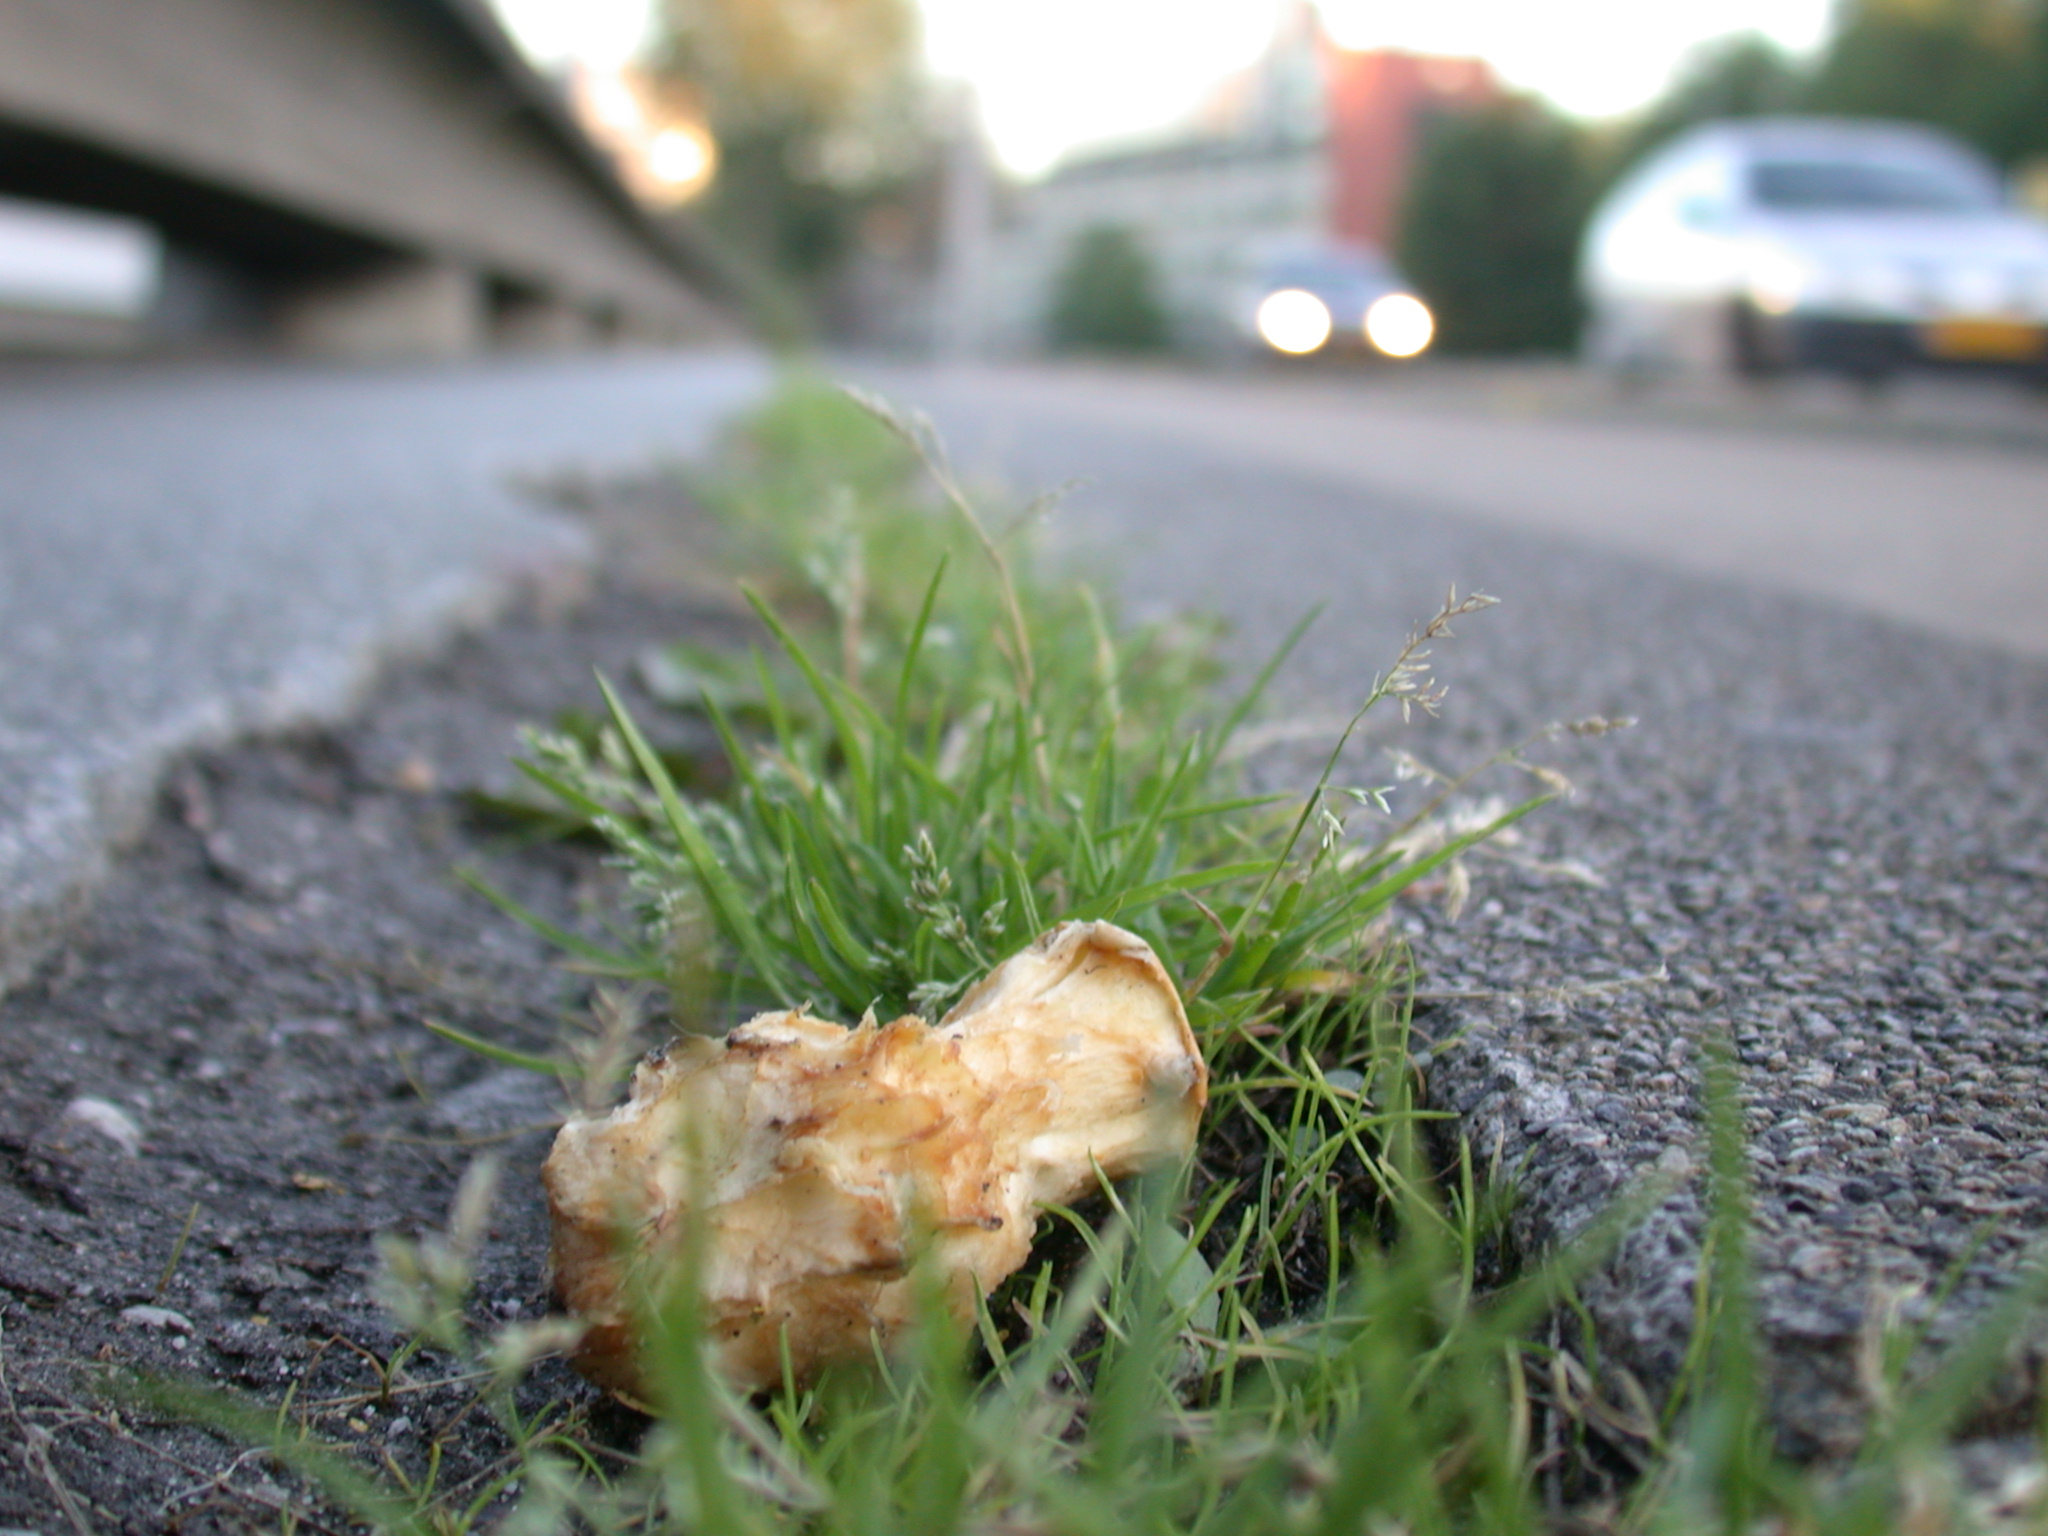 rotten apple in the side of the road street tarmac grass